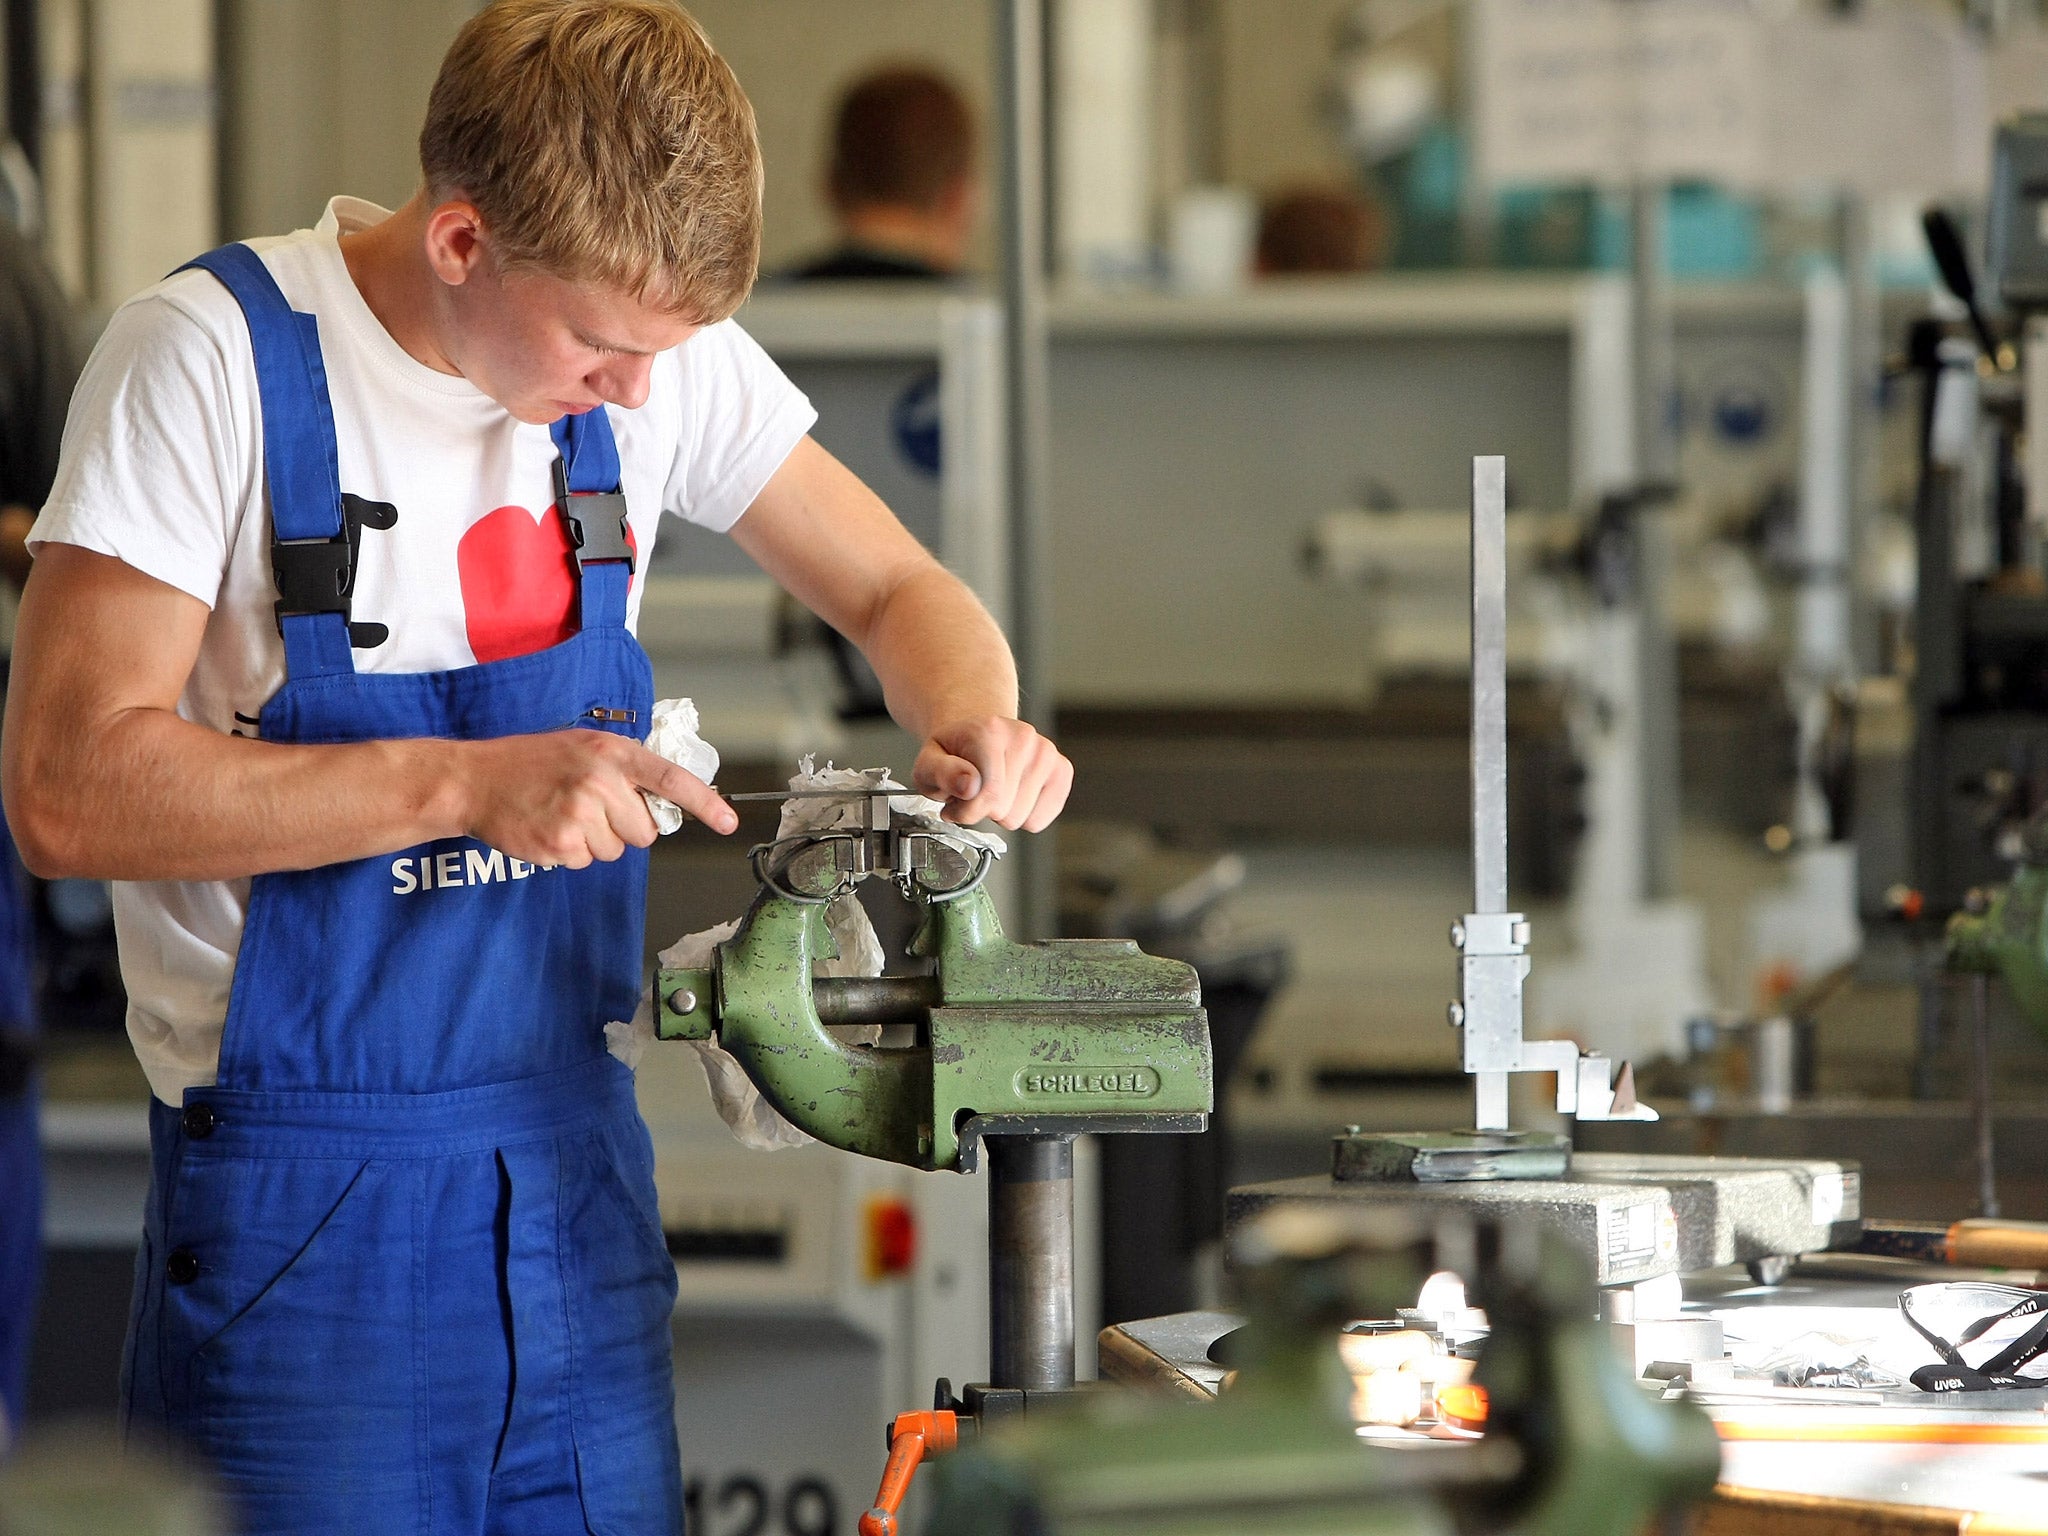 New apprenticeships have fallen since the introduction of the levy